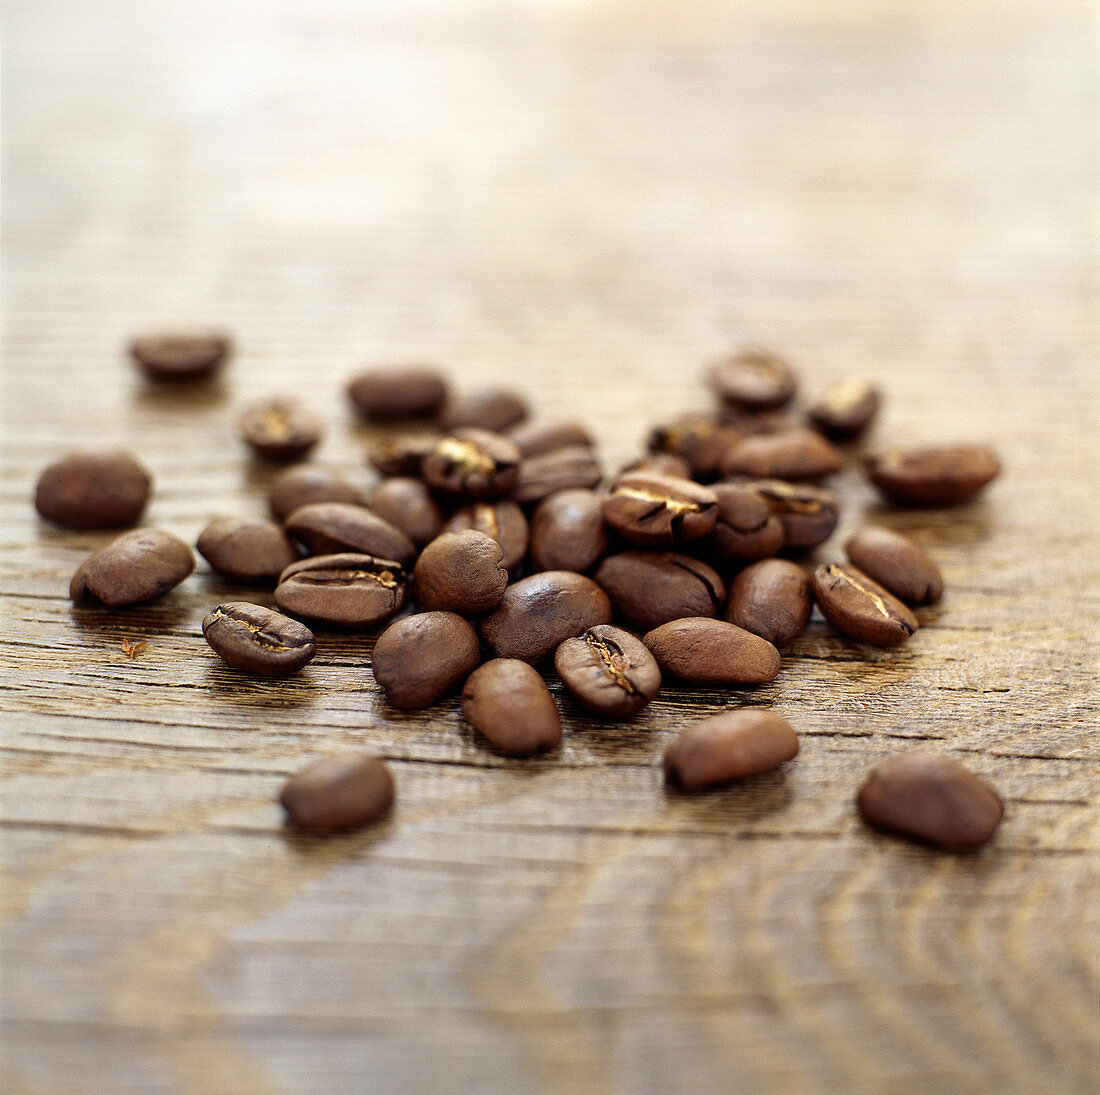 Coffee grains on wooden surface